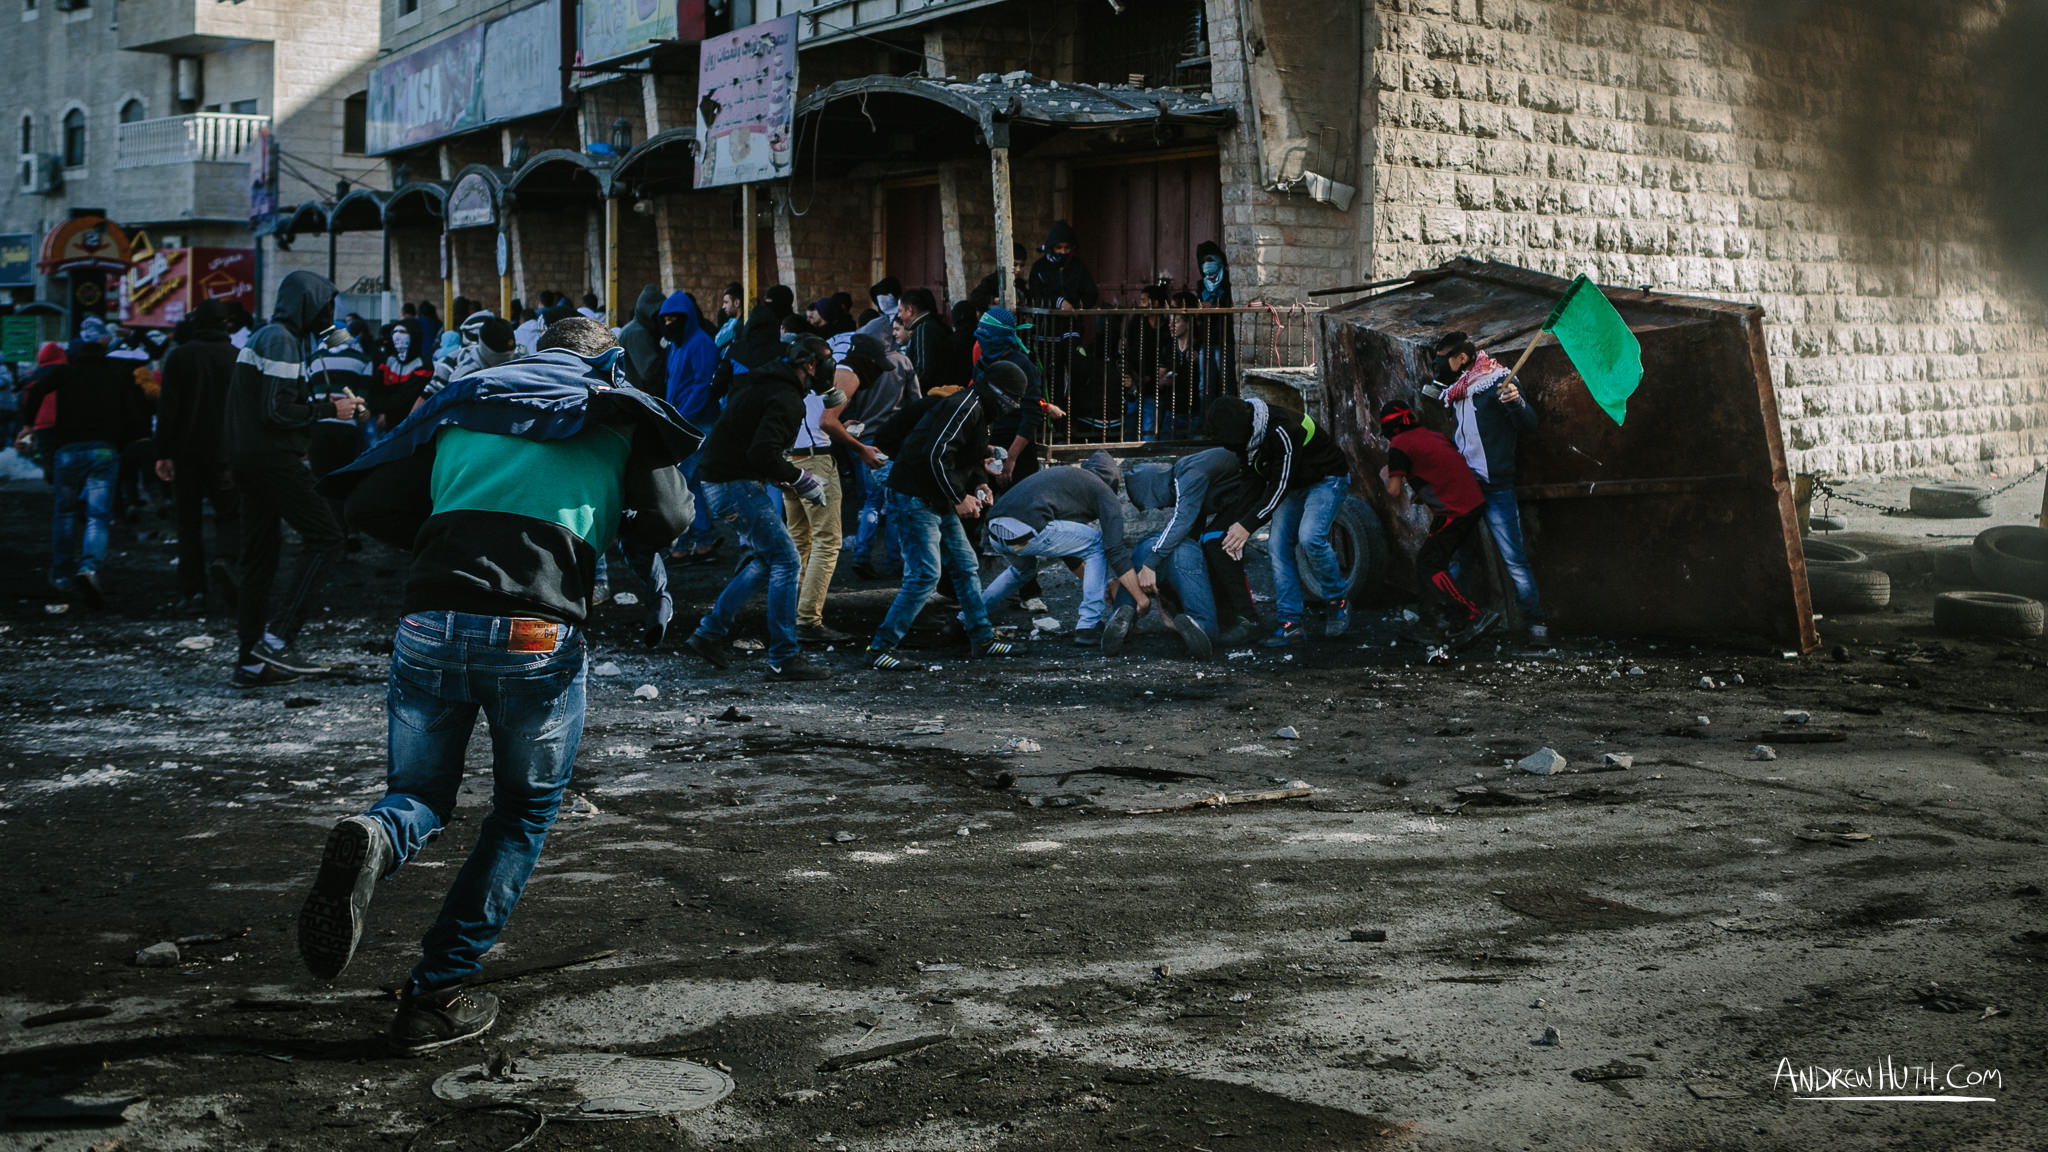  A Palestinian youth gets shot by Israeli military during a clash at Shu'afat Refugee Camp.  Palestinian youth clash with Israeli military in Shu'afat Refugee Camp in East Jerusalem on Friday, November 7, 2014. &nbsp;The recent, but temporarily total